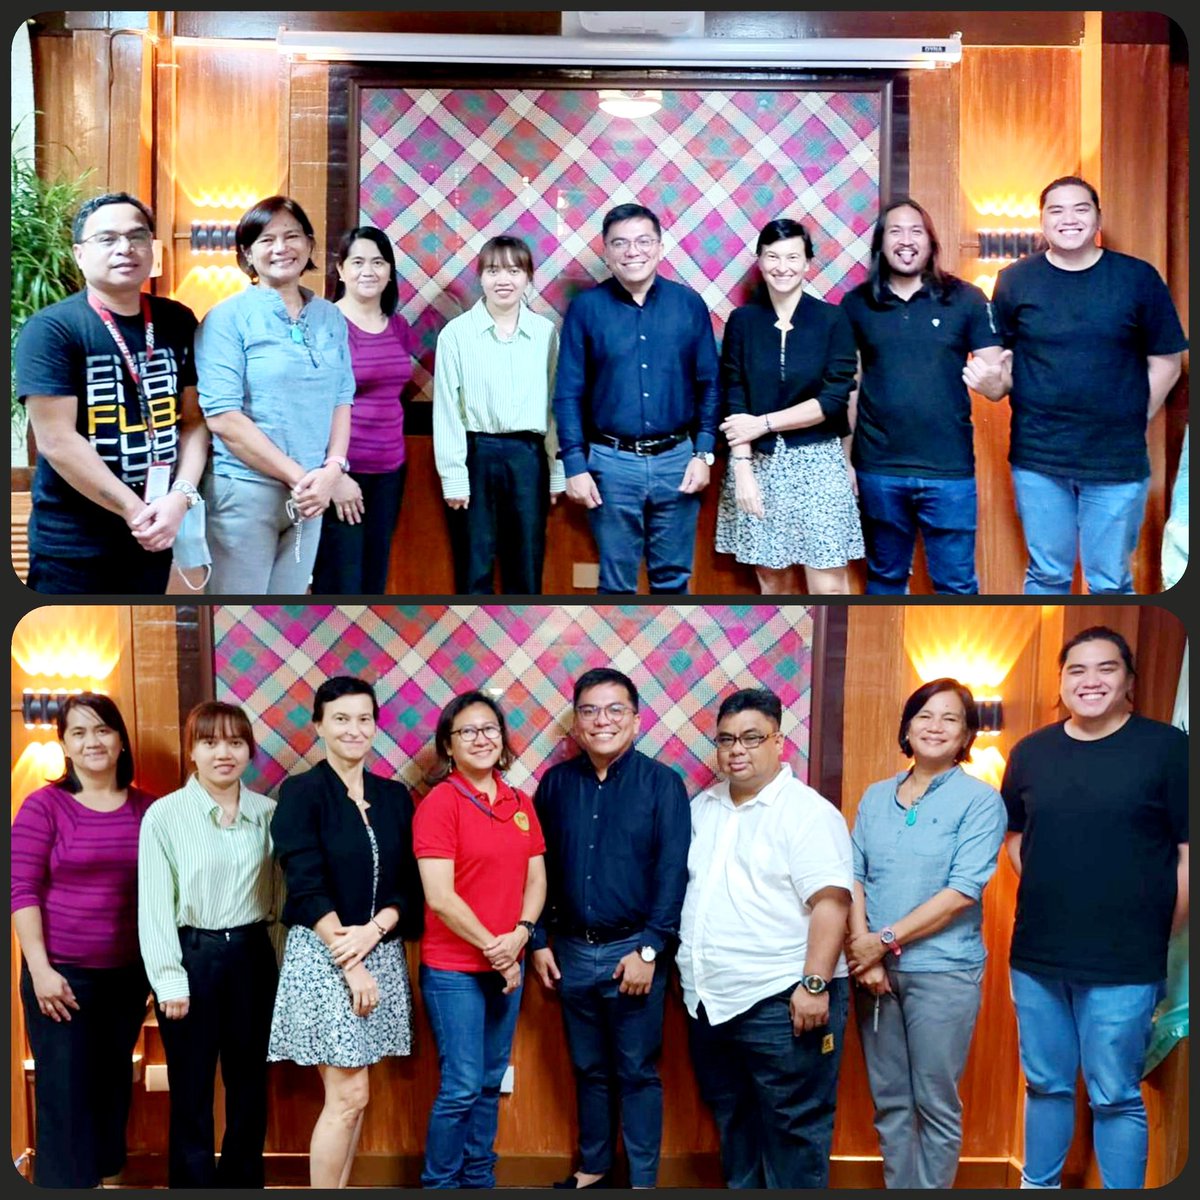 Today's discussions focused on supporting #OH policy and compliance for #ASF control on small pig farms while protecting vulnerable farmers' livelihoods. Great synergy between #BIGPROJECT and #LIVEHEALTH project. @rico_ancog
@Cirad @PREZODE_Intl
@UPLBOfficial @em_lastica